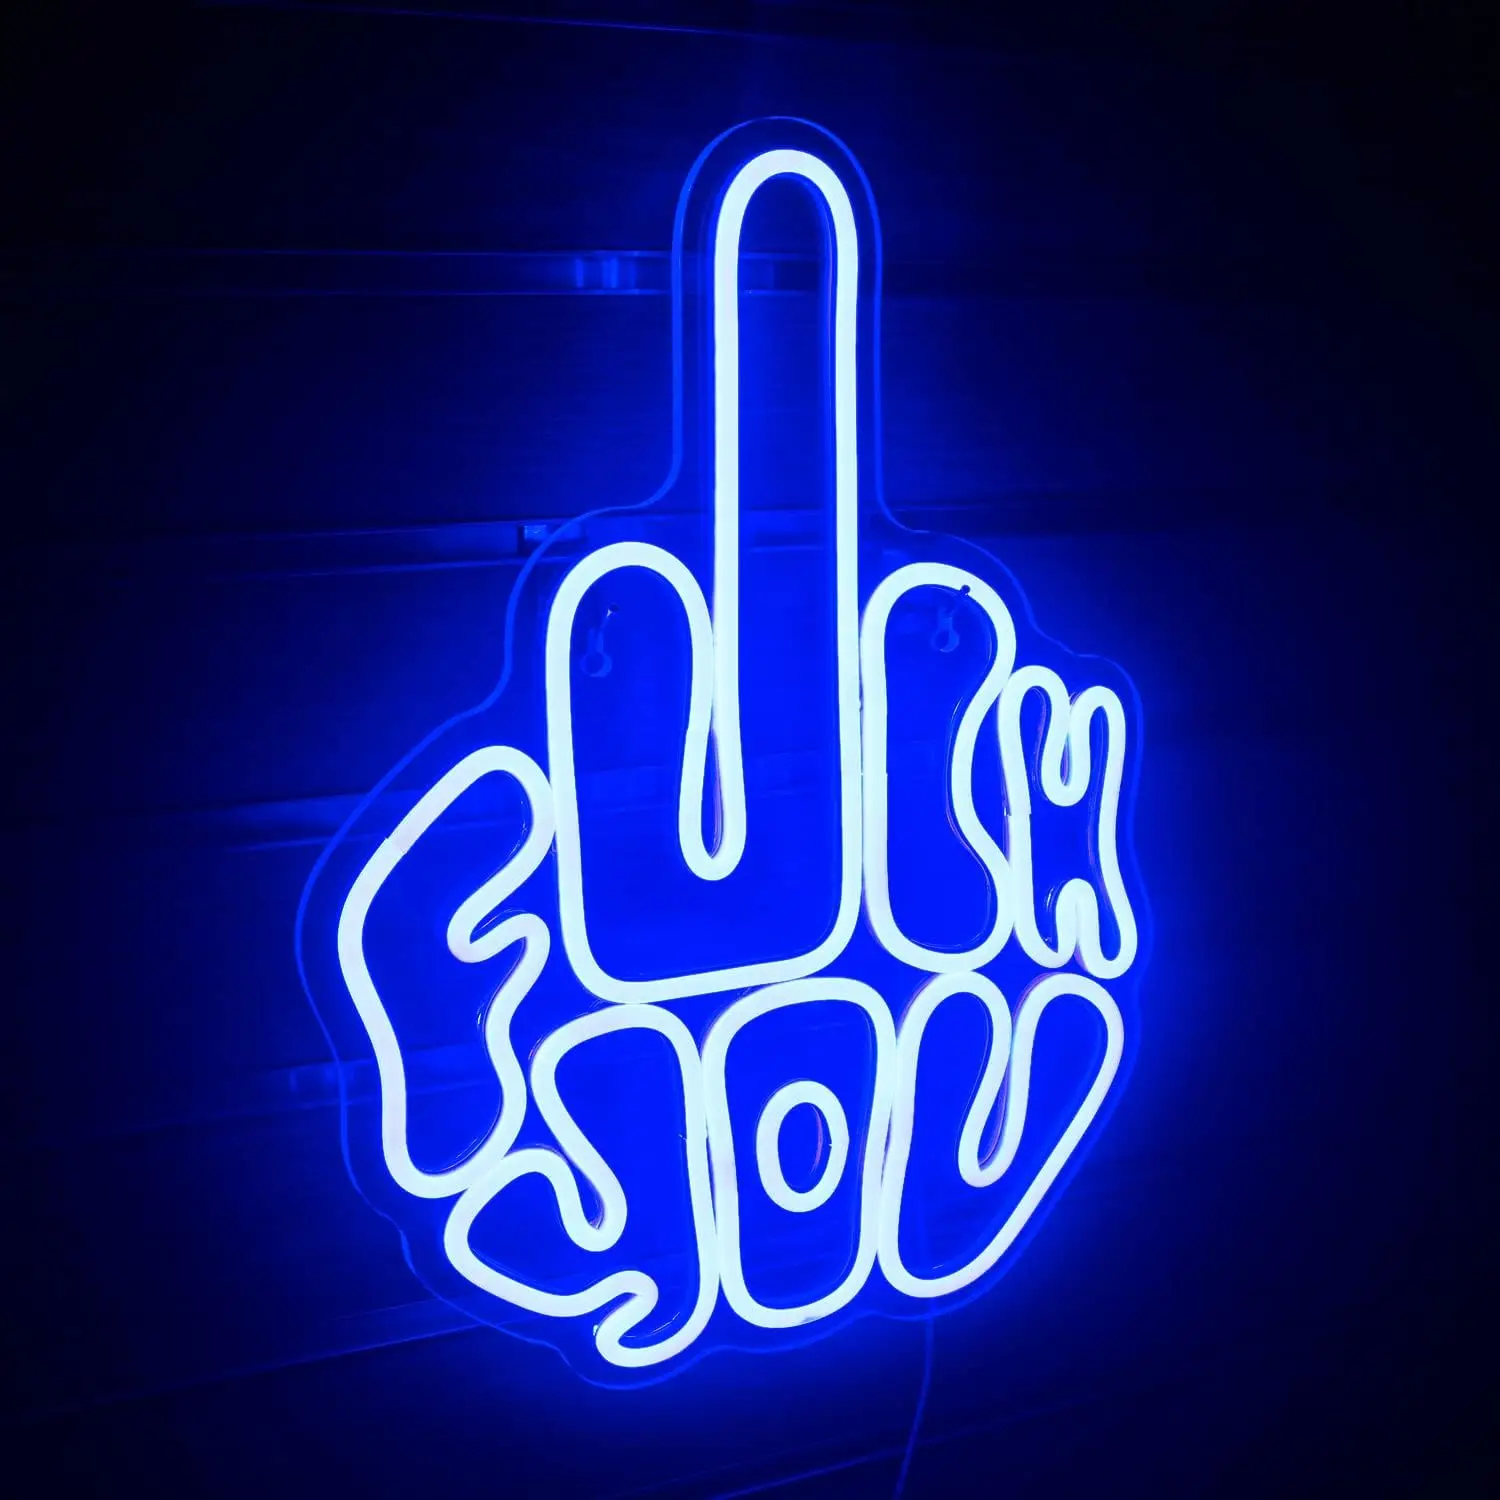 

Letters Gesture Neon Signs for Wall Blue LED Neon Lights USB Neon Wall Light Neon Bar Light Up Sign for Bedroom Party Pub Game